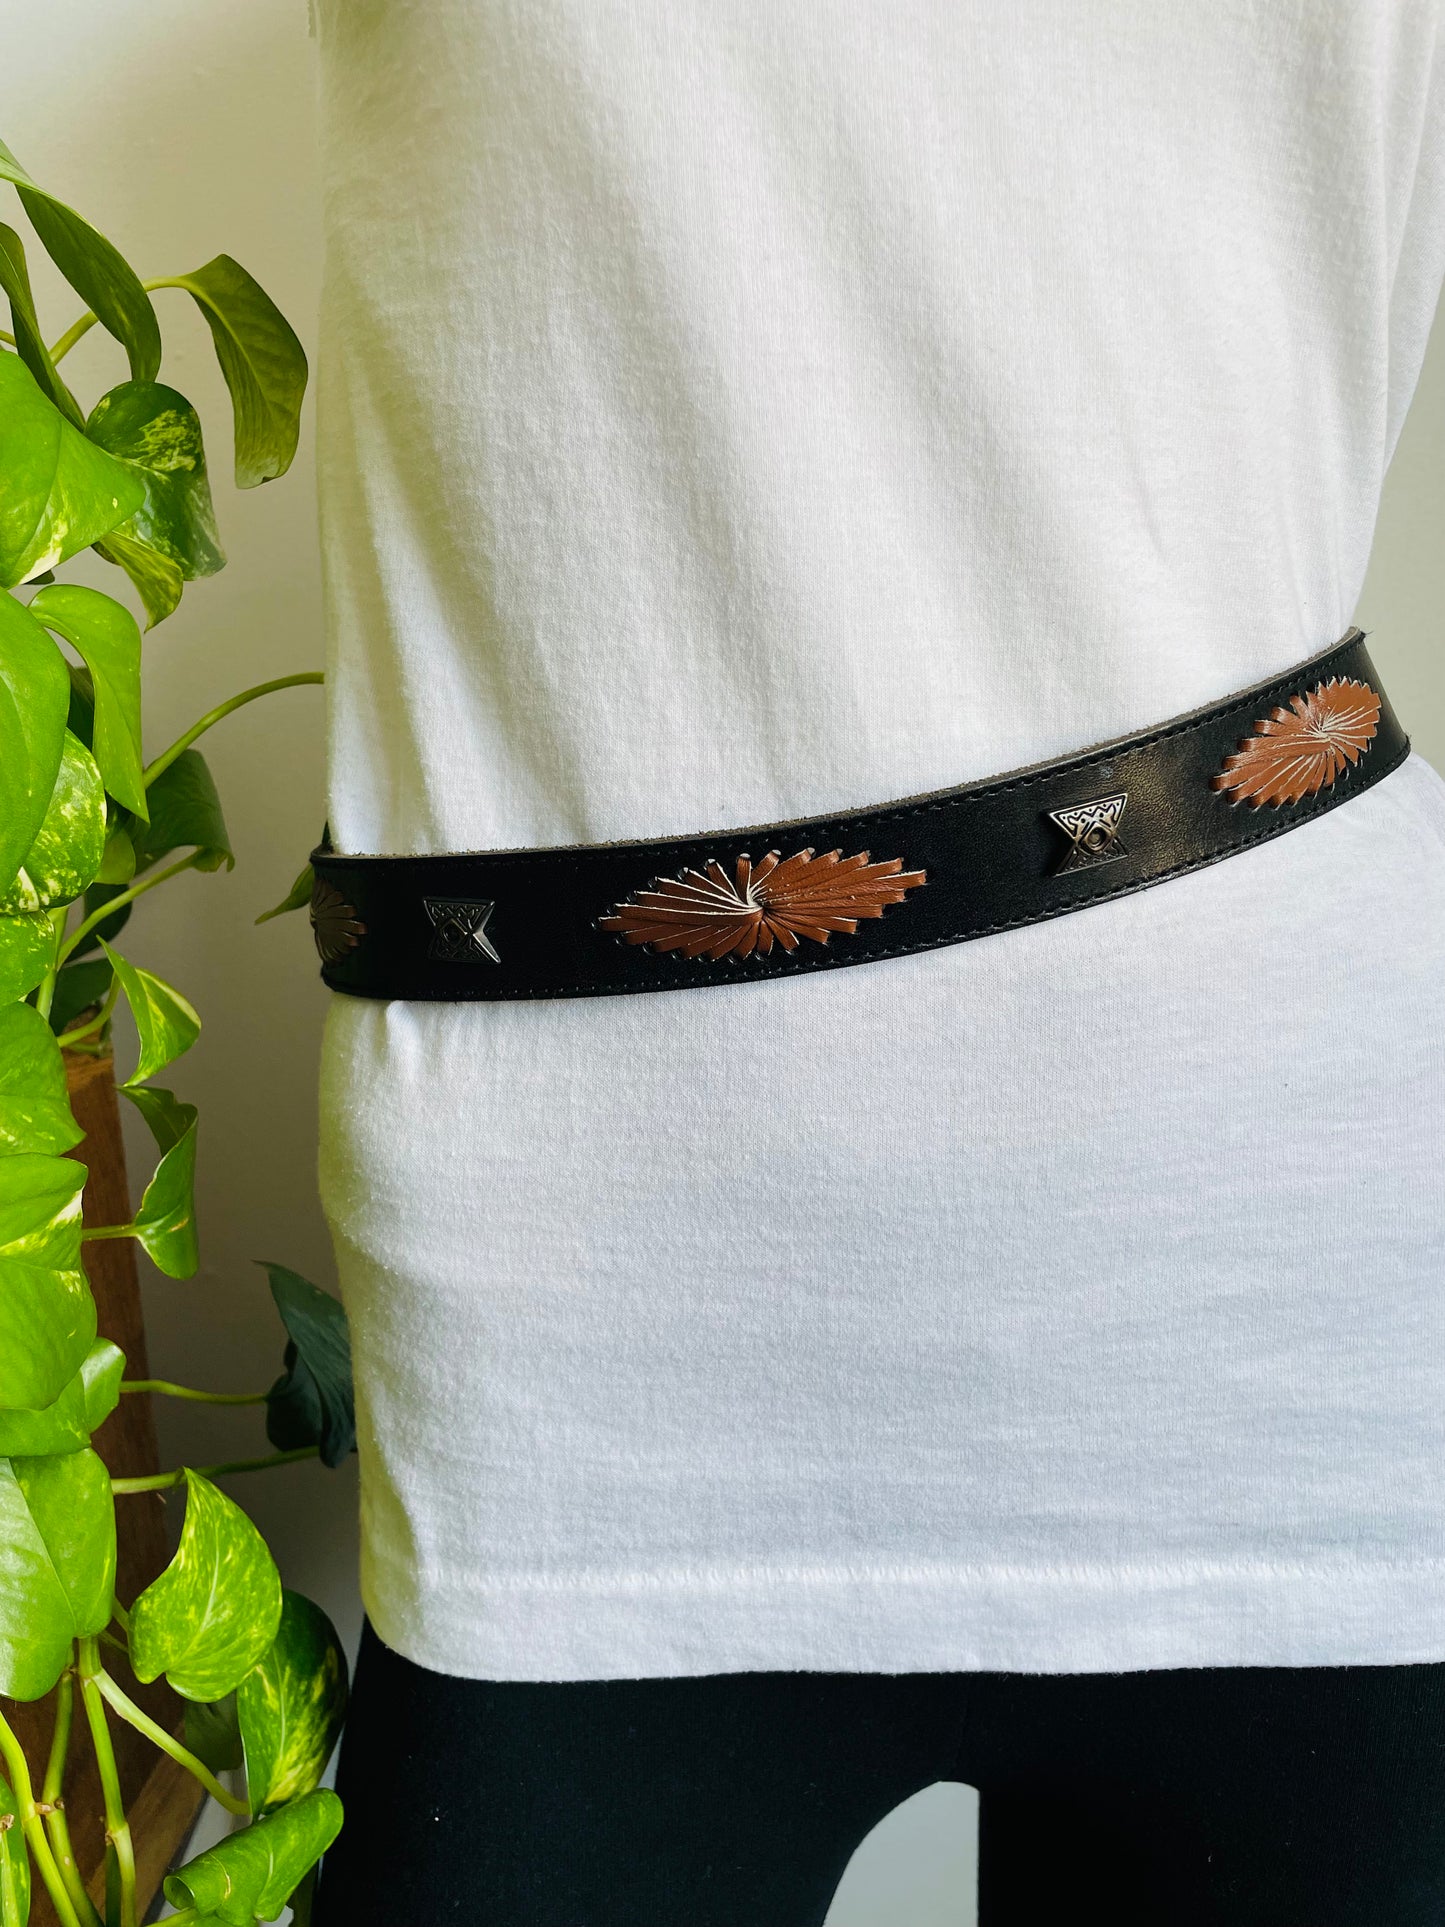 Liz Claiborne Accessories Genuine Leather Belt Style 2750 Size Small - Made in Taiwan